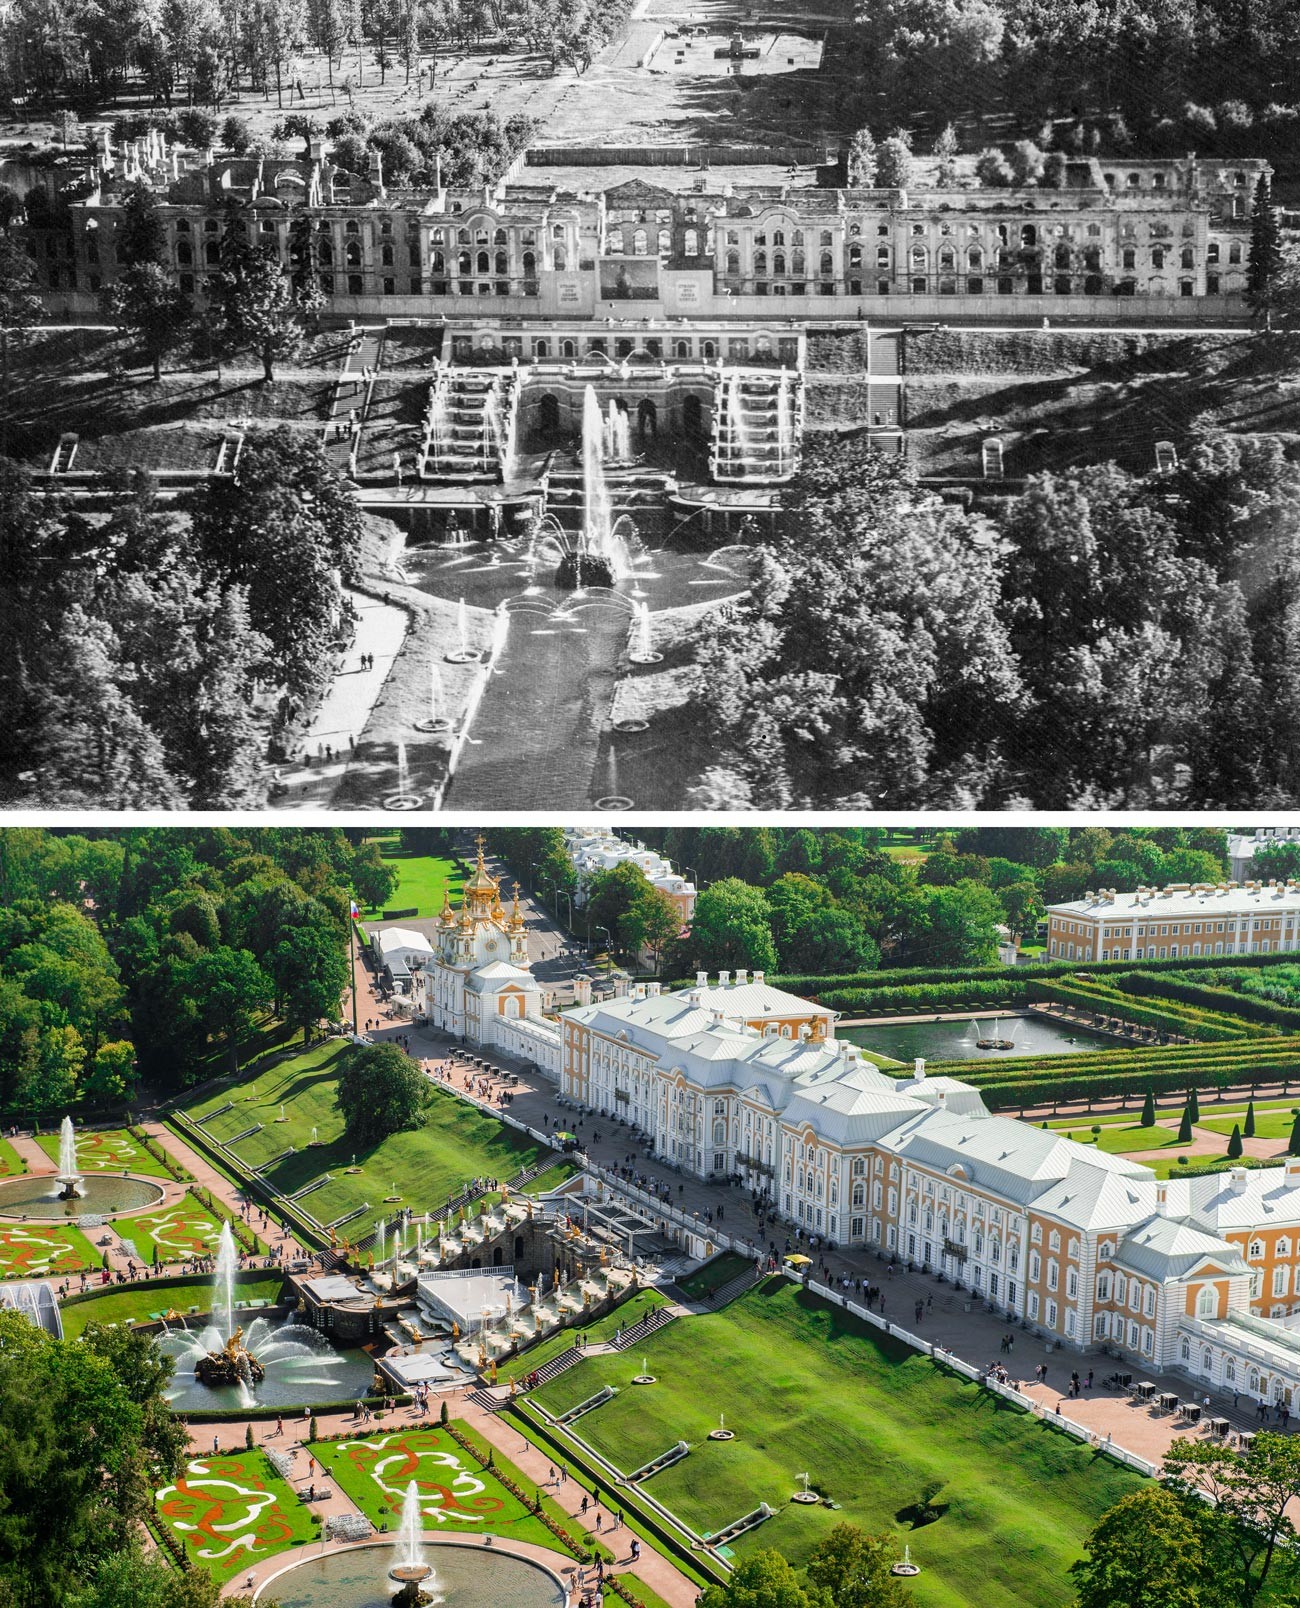 View of the Upper Garden, the Grand Palace and the Grand Cascade fountain in 1944 and now